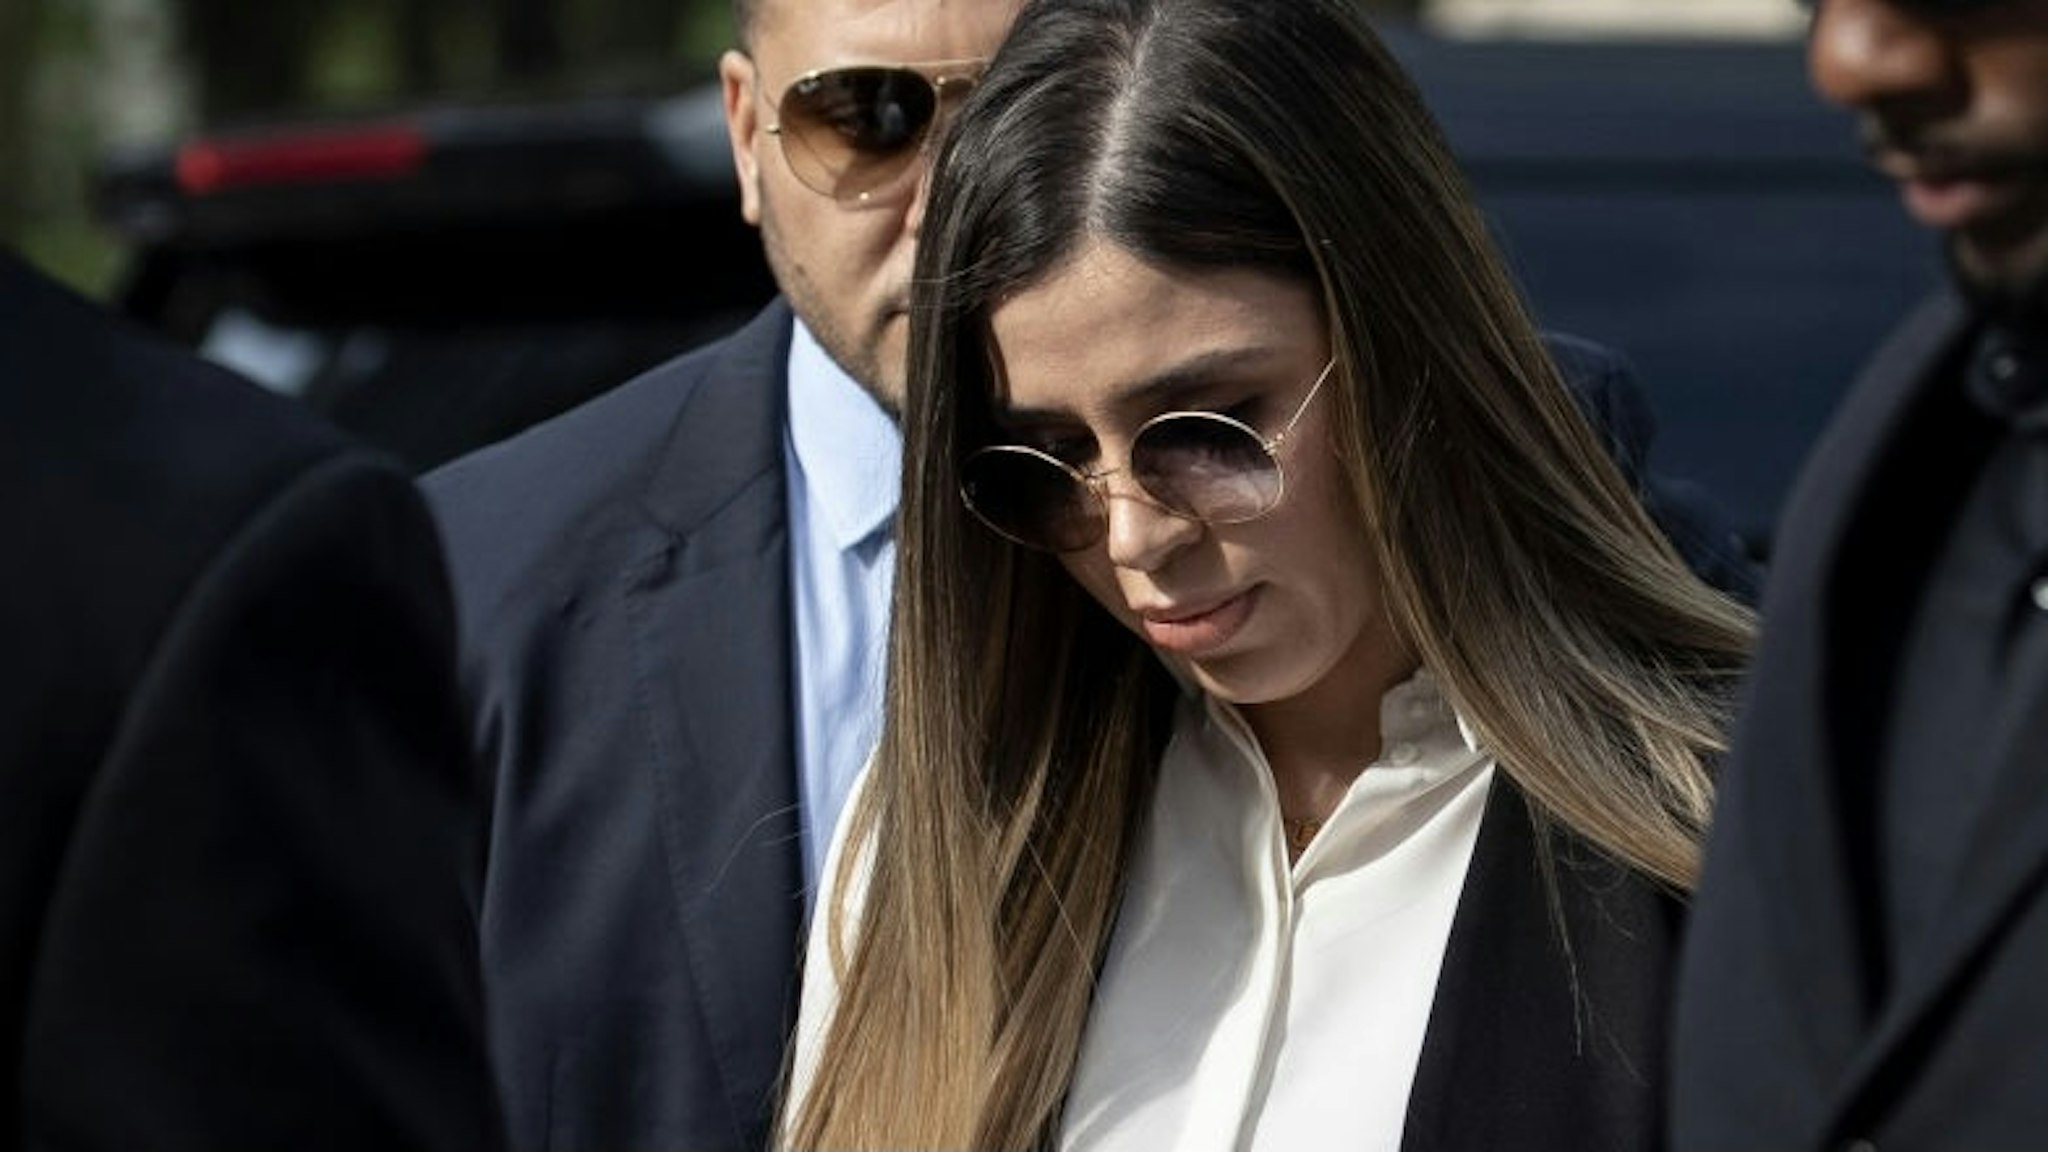 Mexican Drug Lord El Chapo Sentenced In New York NEW YORK, NY - JULY 17: Emma Coronel Aispuro, wife of Joaquin "El Chapo" Guzman, is surrounded by security as she arrives at federal court on July 17, 2019 in New York City. El Chapo was found guilty on all charges in a drug conspiracy trial and will be sentenced this morning. (Photo by Drew Angerer/Getty Images) Drew Angerer / Staff via Getty Images